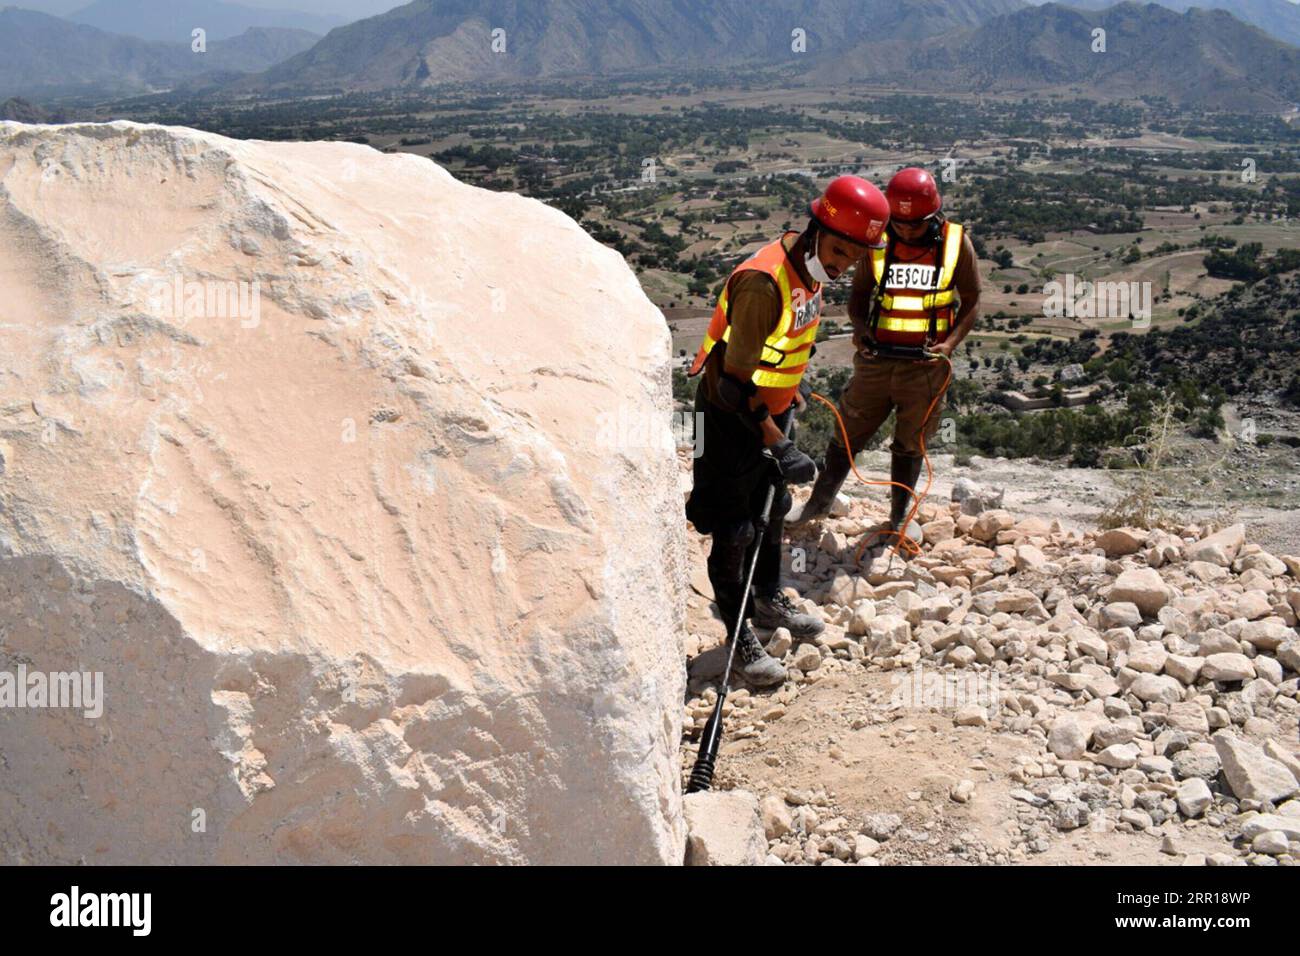 200909 -- BEIJING, Sept. 9, 2020 -- Rescuers search for miners after a rock slide at a marble mine in Pakistan s northwest tribal district of Mohmand, Sept. 8, 2020. The death toll from the rock slide incident at a marble mine, which took place on Monday in Pakistan s northwest tribal district of Mohmand, climbed to 19, police and local media said on Tuesday. Str/Xinhua XINHUA PHOTOS OF THE DAY Stringer PUBLICATIONxNOTxINxCHN Stock Photo